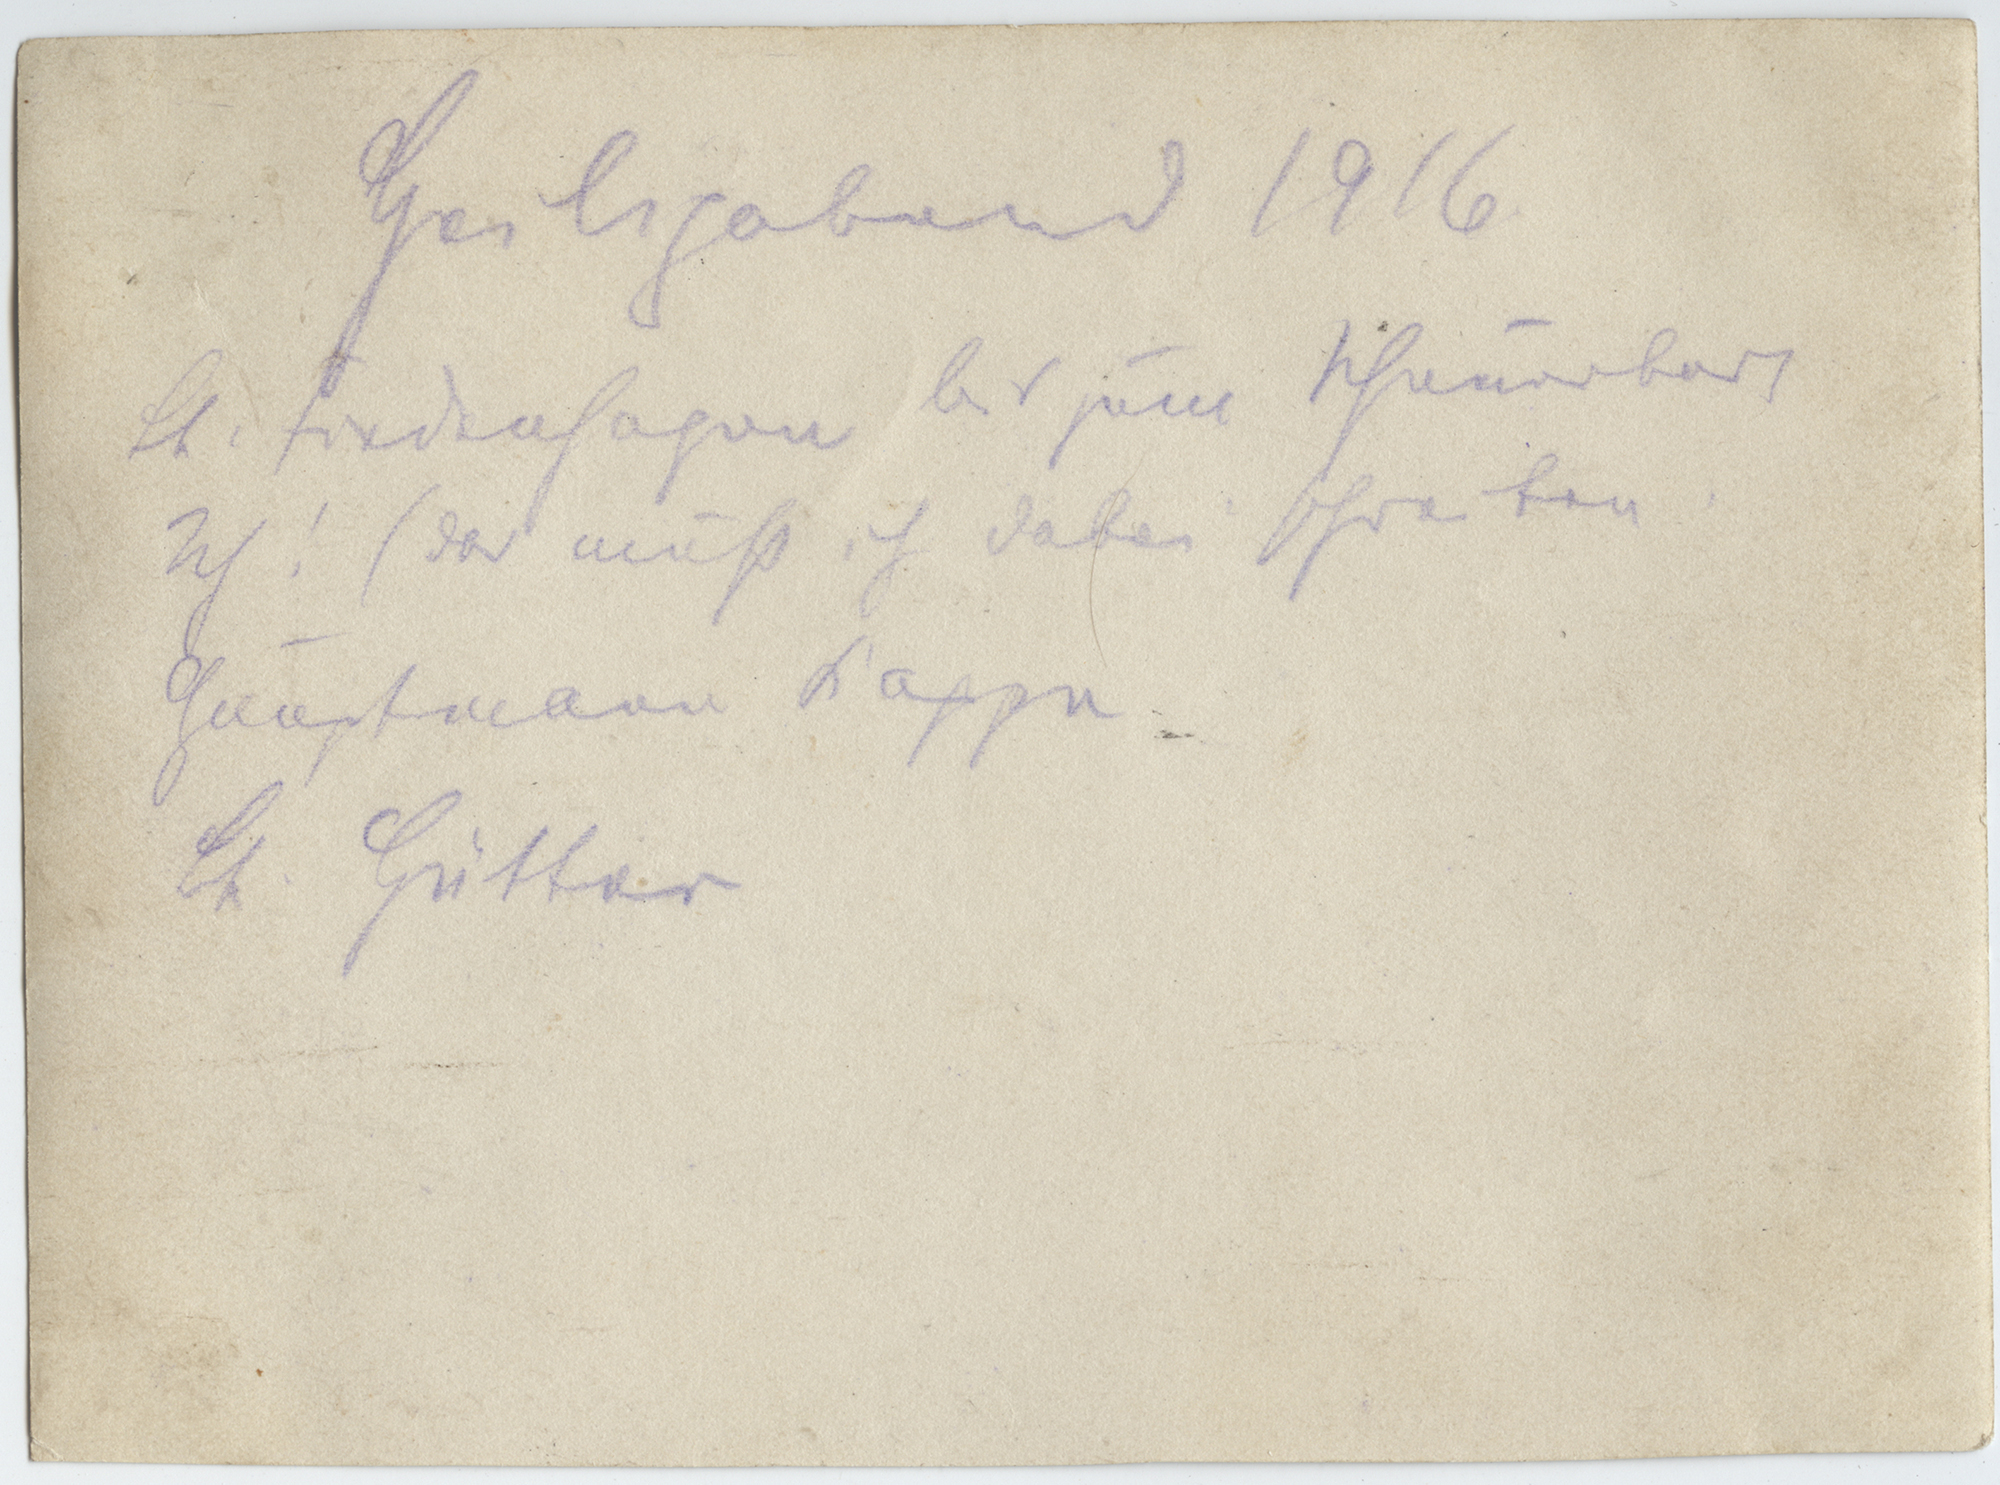 Back of an old photograph with cursive German writing in faded ink.